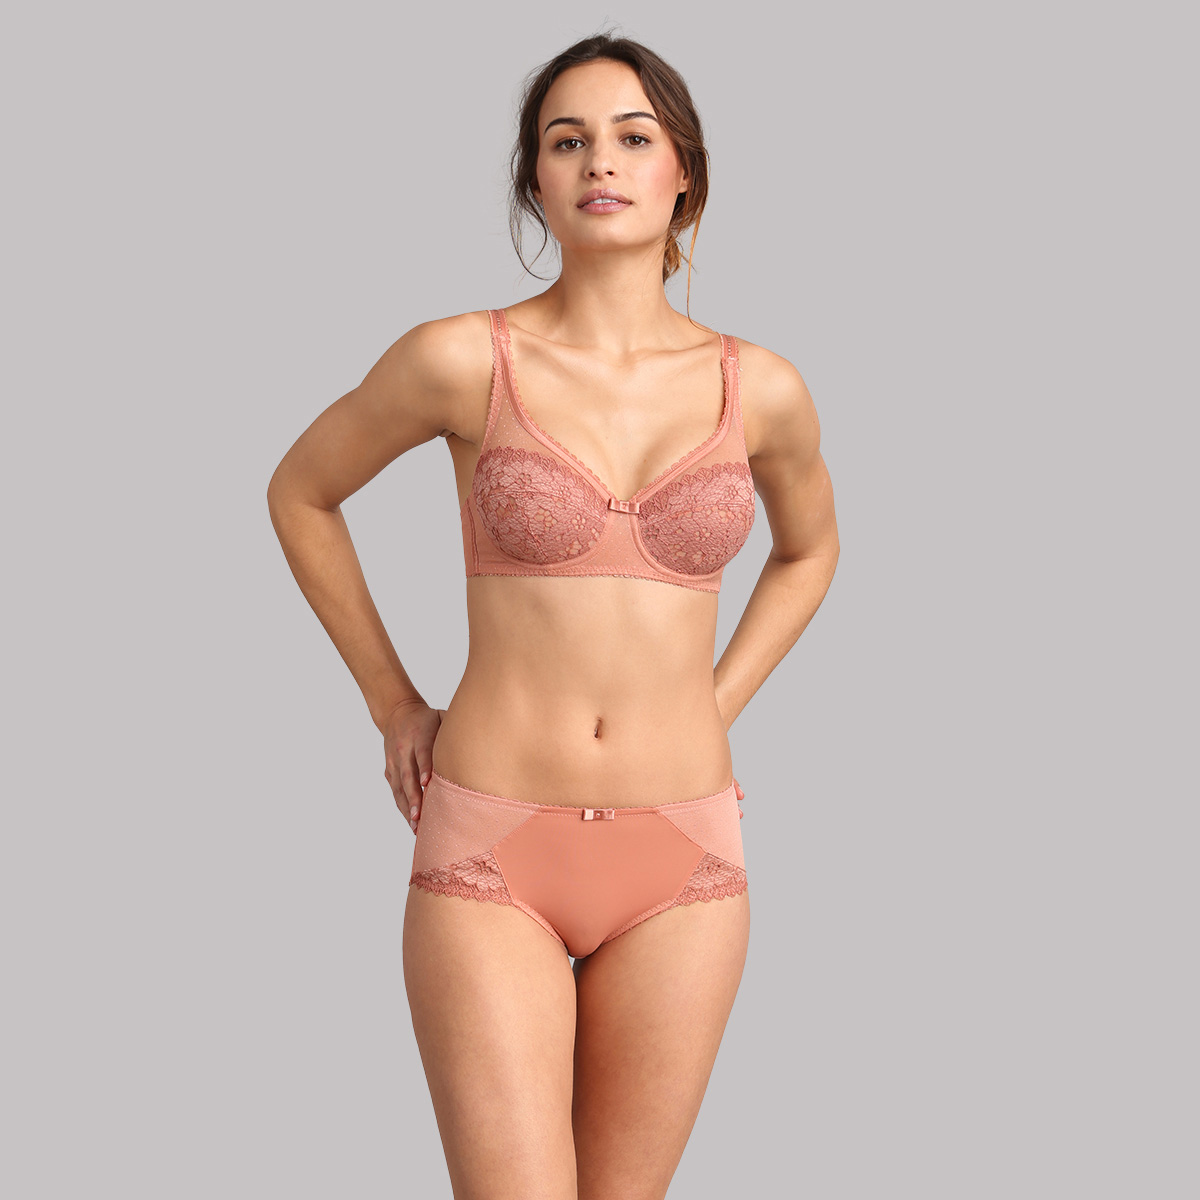 Underwired bra in terracotta - Classic Lace Support, , PLAYTEX